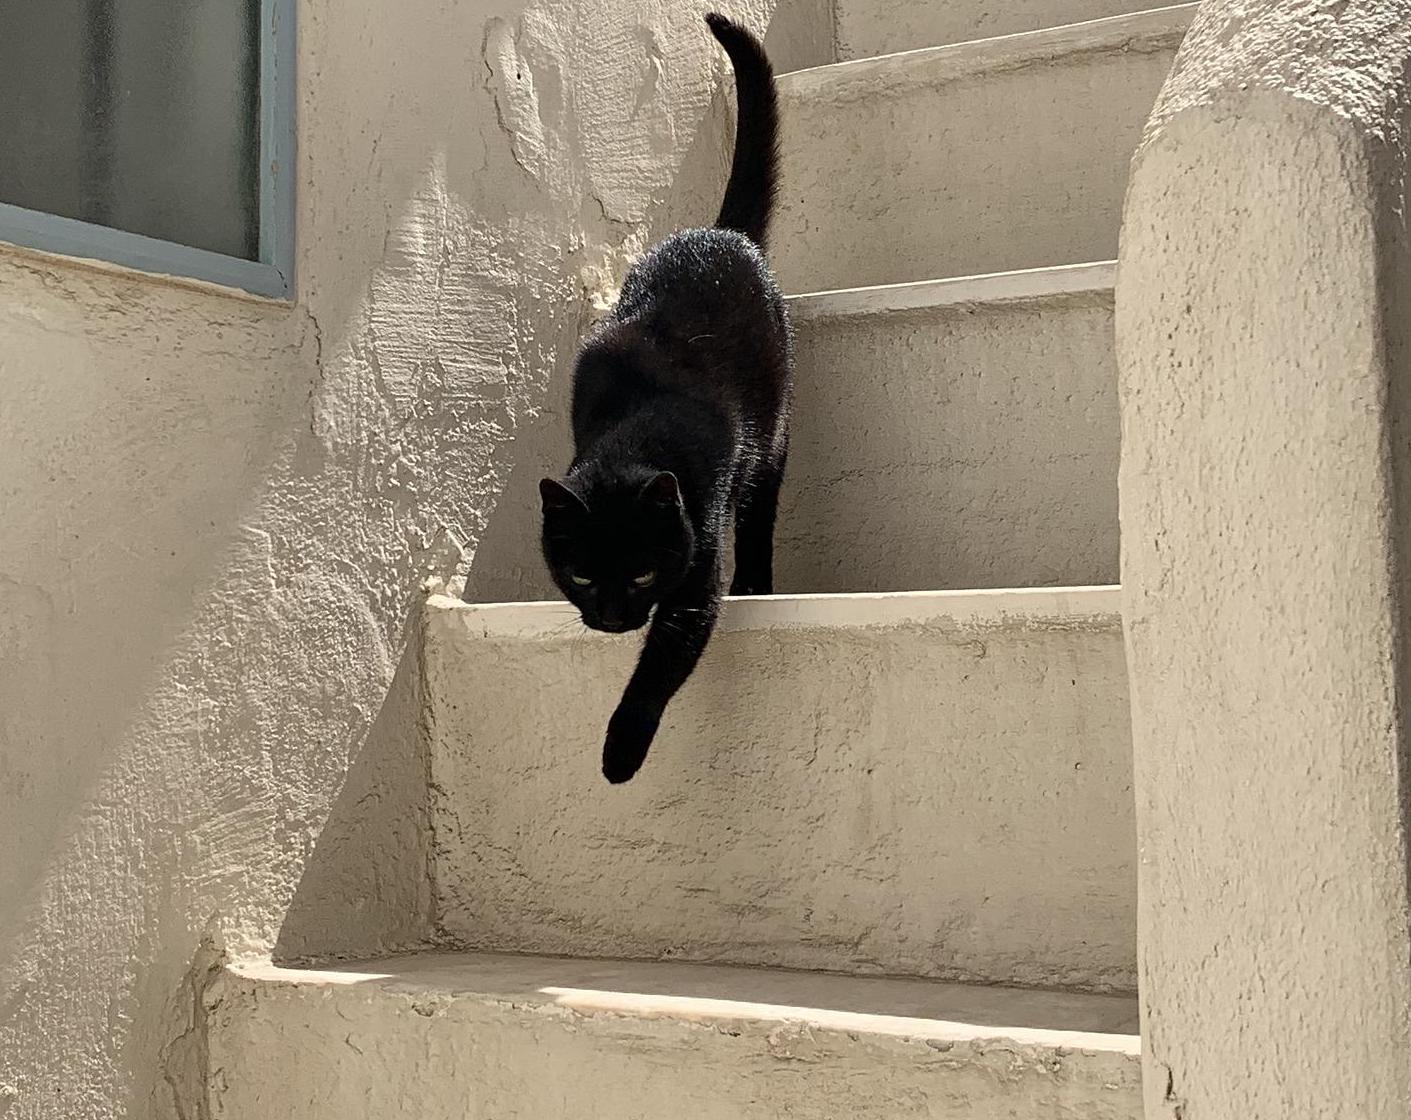 A black cat in the middle of taking a step down in a steep staircase.